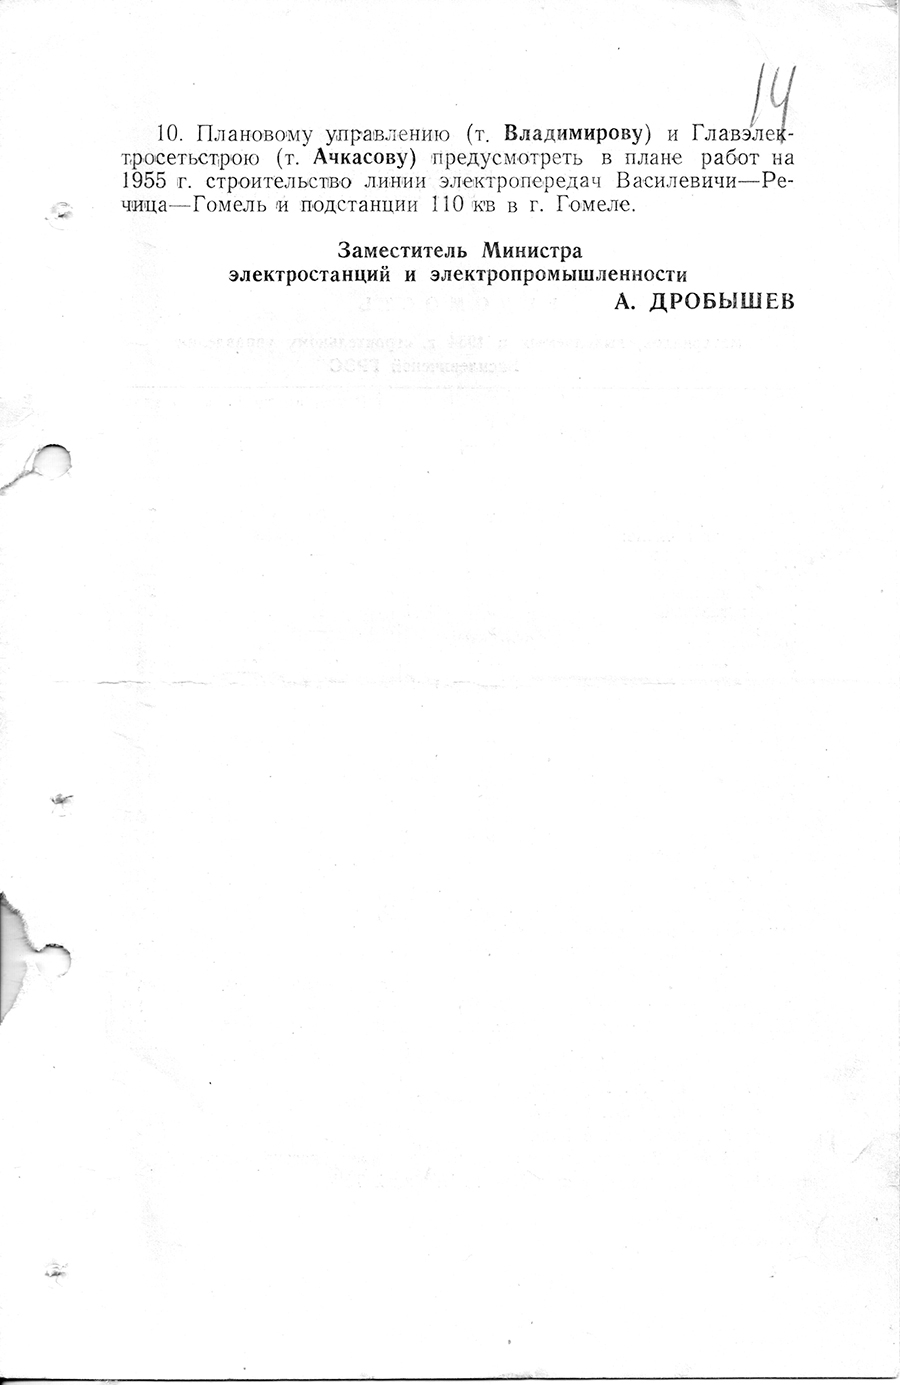 Order No. 206/A of the Ministry of Power Plants and Electric Medications of the USSR on the forcing of the construction of the Vasilevichi State District Power Plant-стр. 2